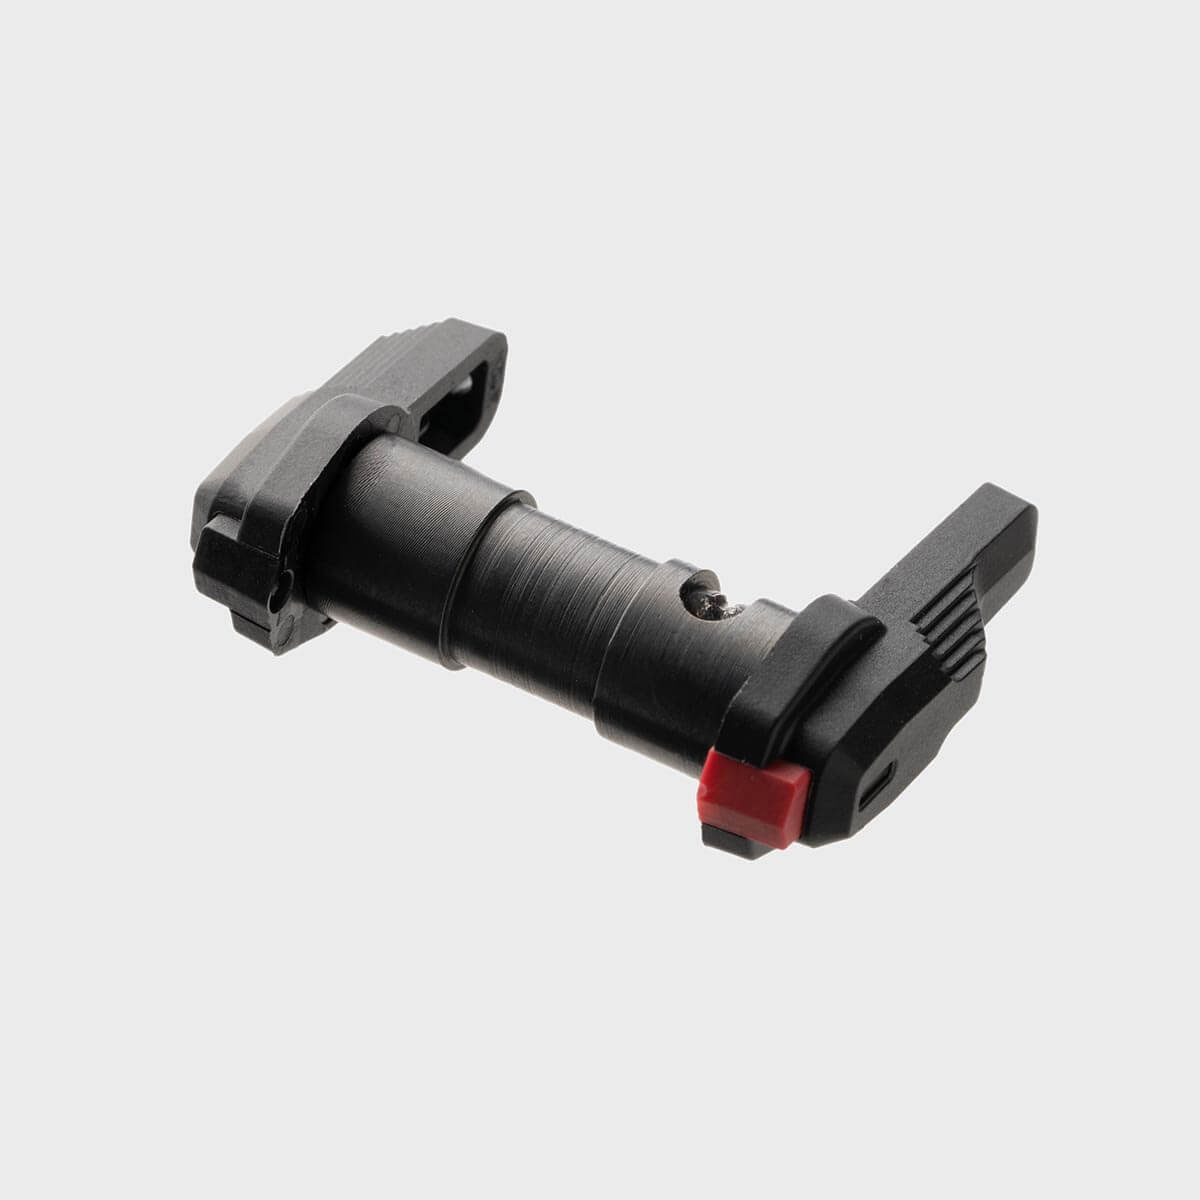 MAGPUL - ESK AMBIDEXTROUS SAFETY SELECTOR FOR AR-15